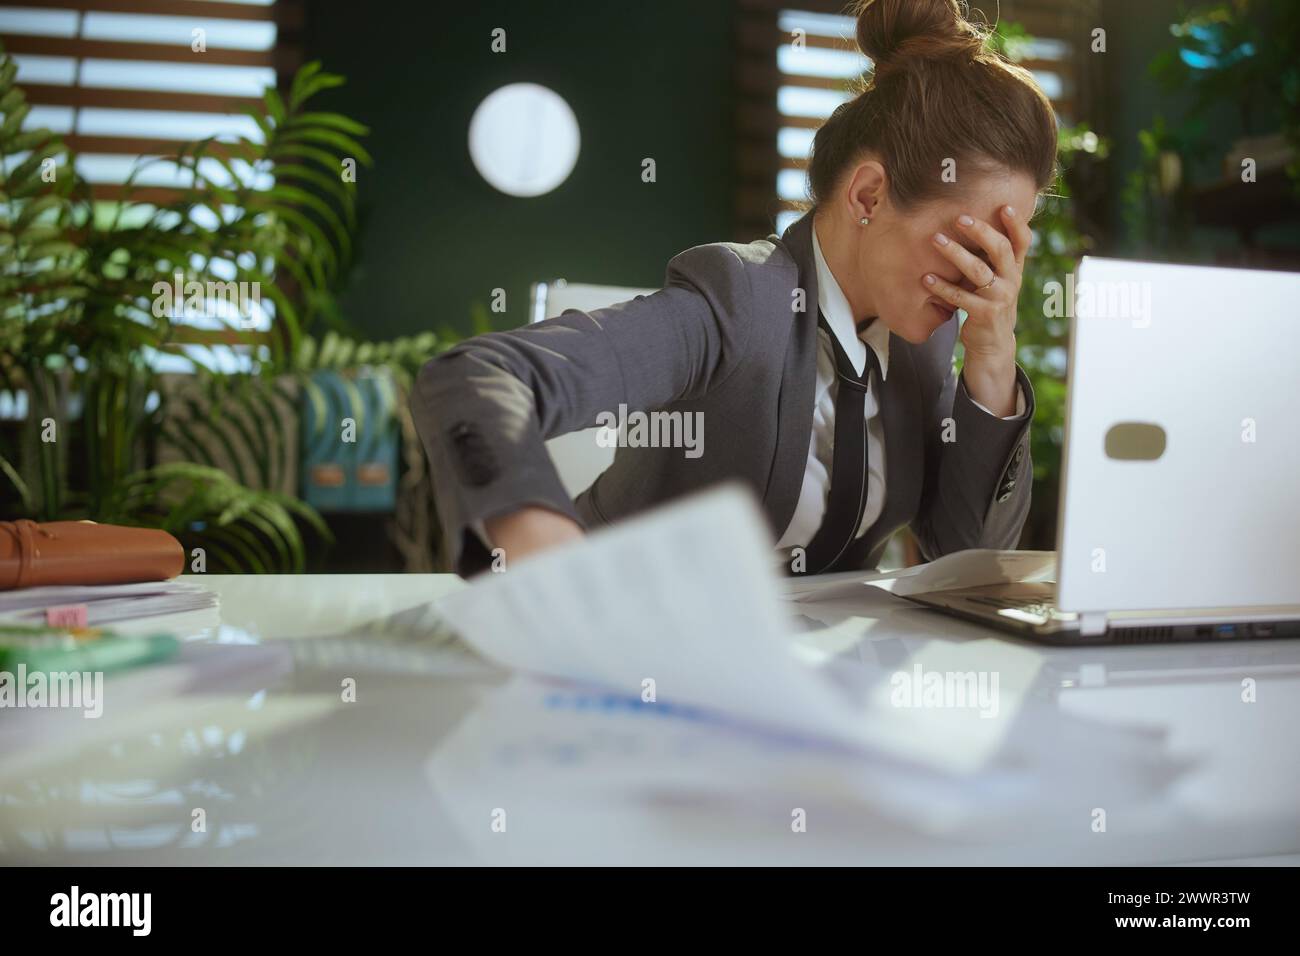 New job. sad modern middle aged woman worker in modern green office in grey business suit with laptop throwing documents. Stock Photo